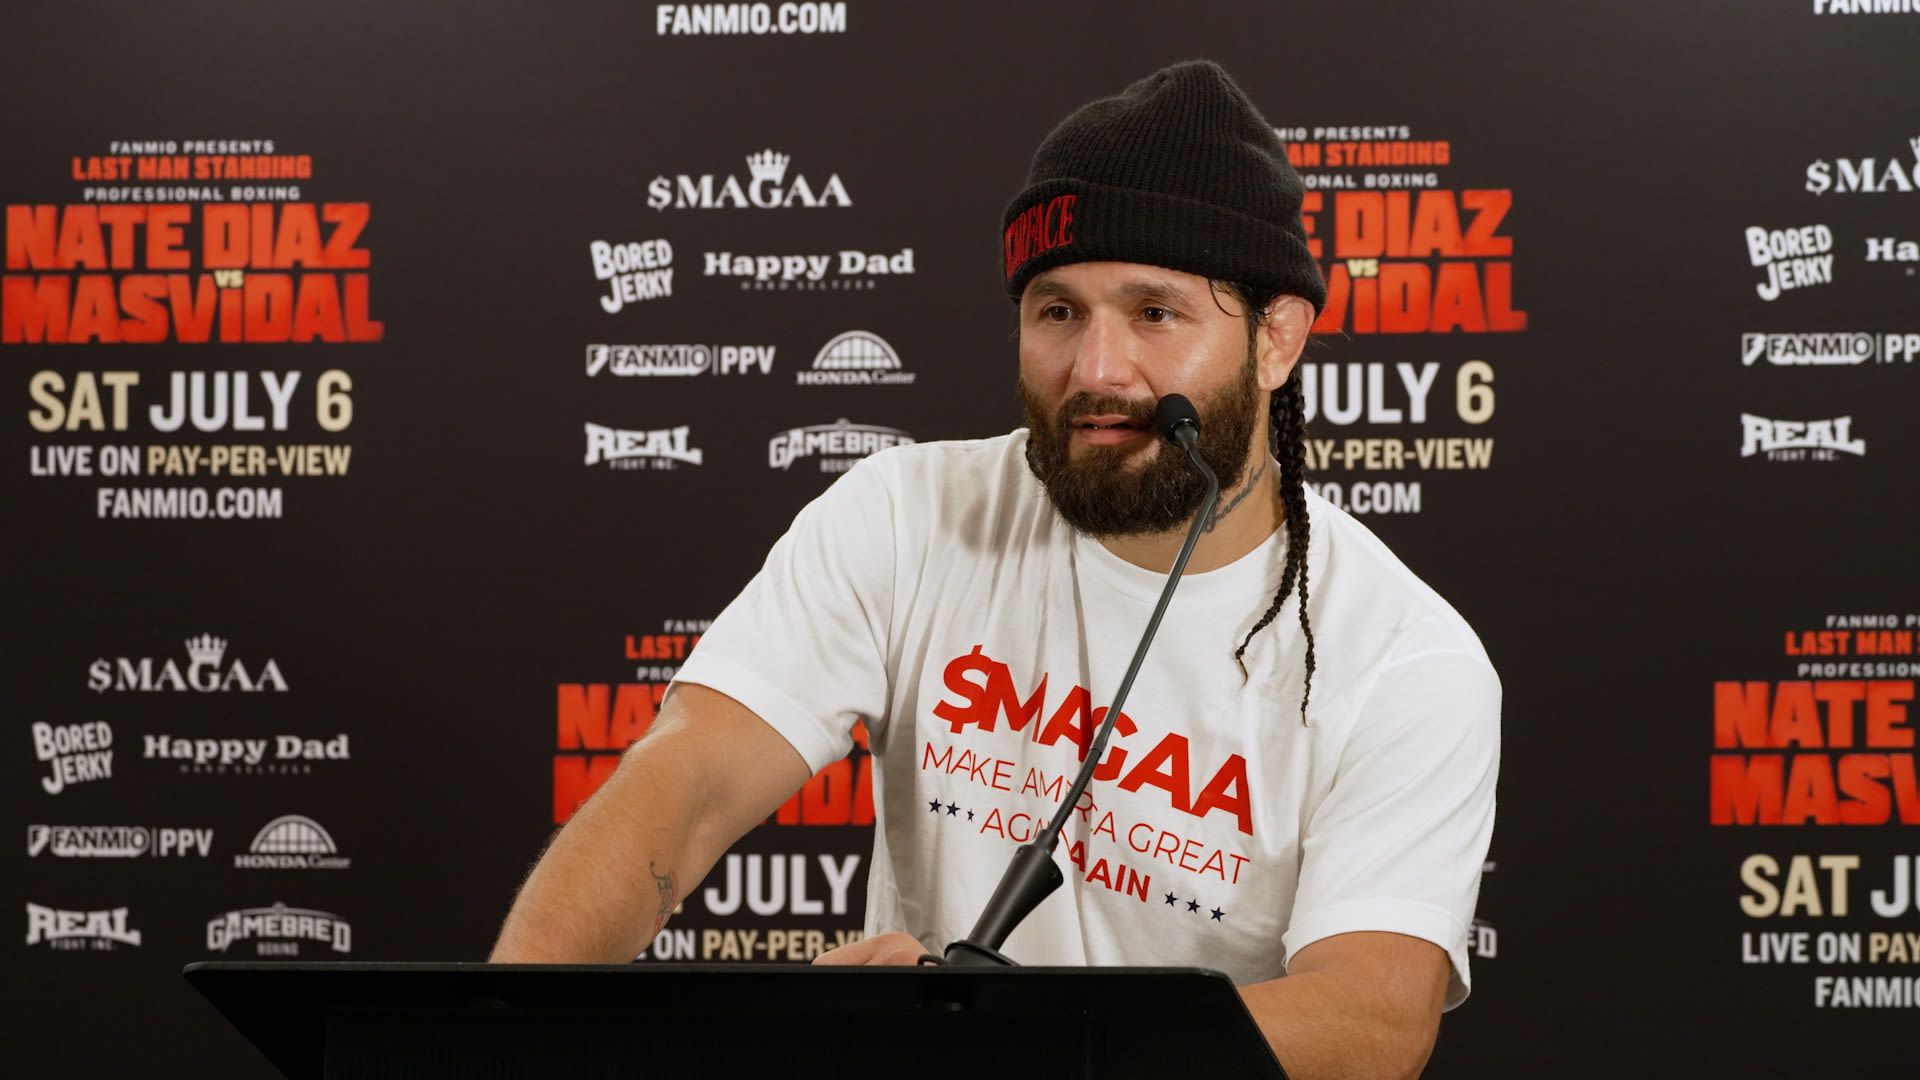 Jorge Masvidal feels burned by judges after boxing loss to Nate Diaz: ‘There’s just no way’